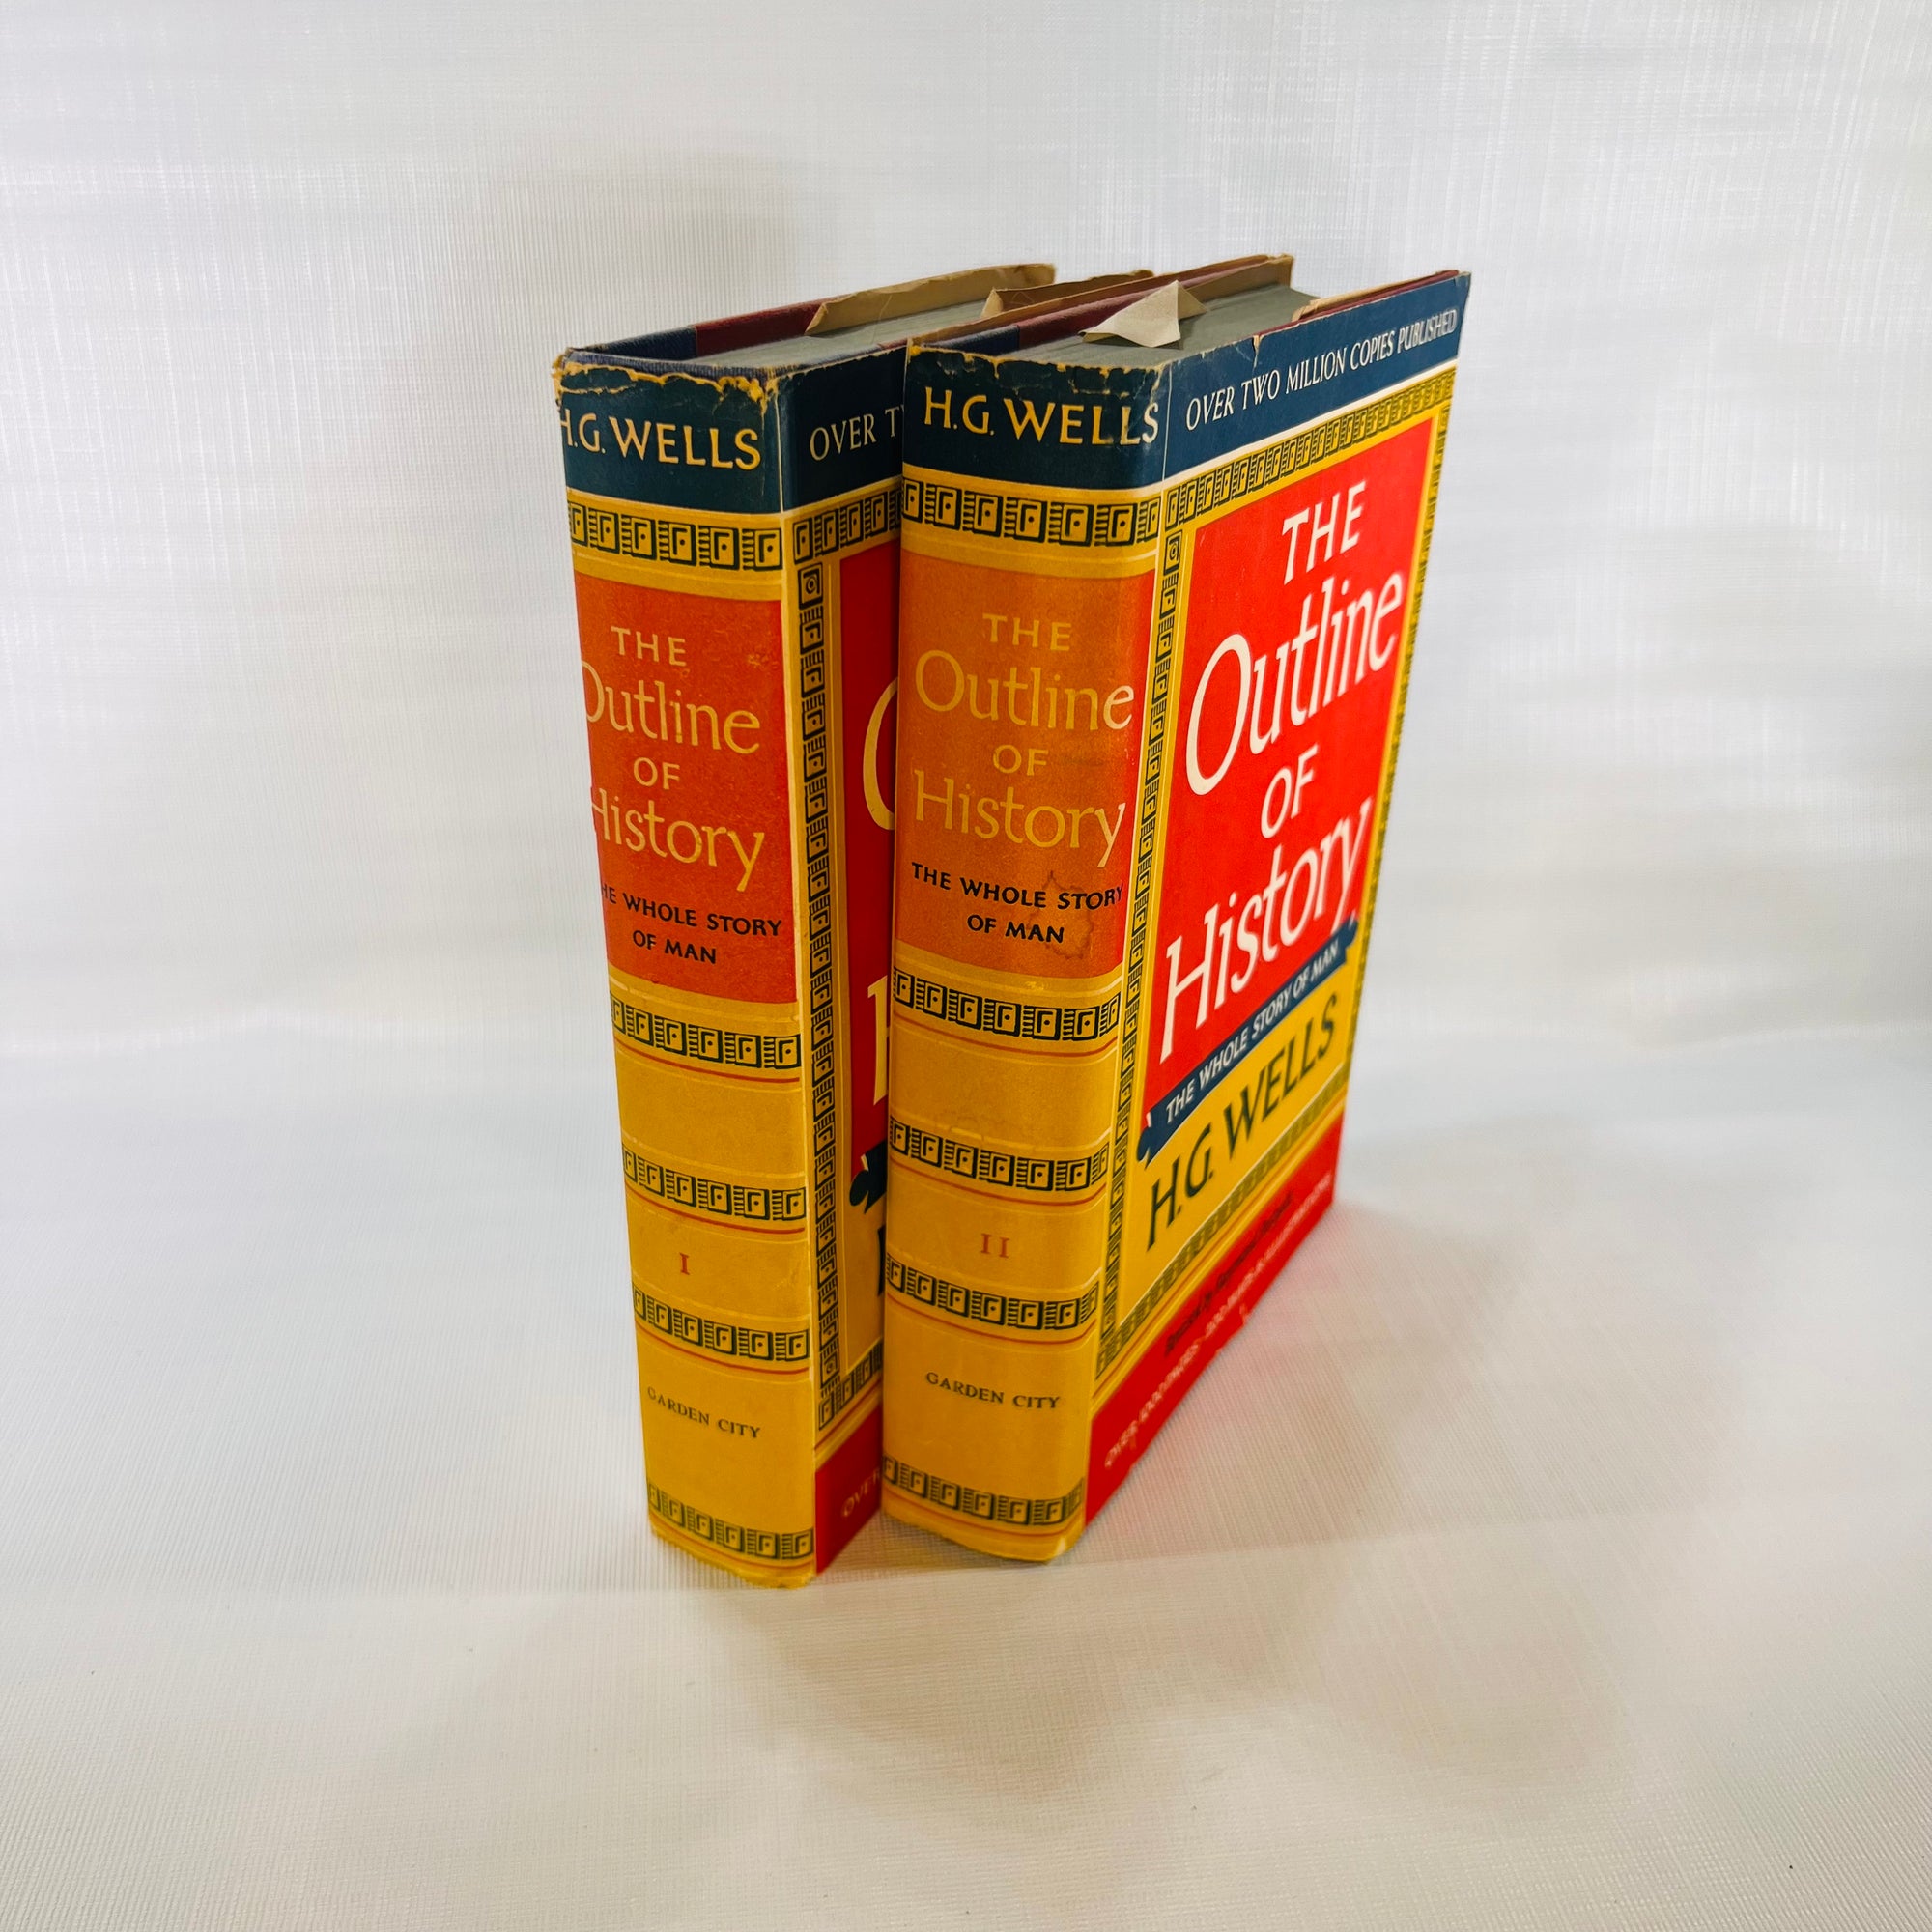 The Outline of History by H.G.Wells Garden City Books Two Volumes-Reading Vintage